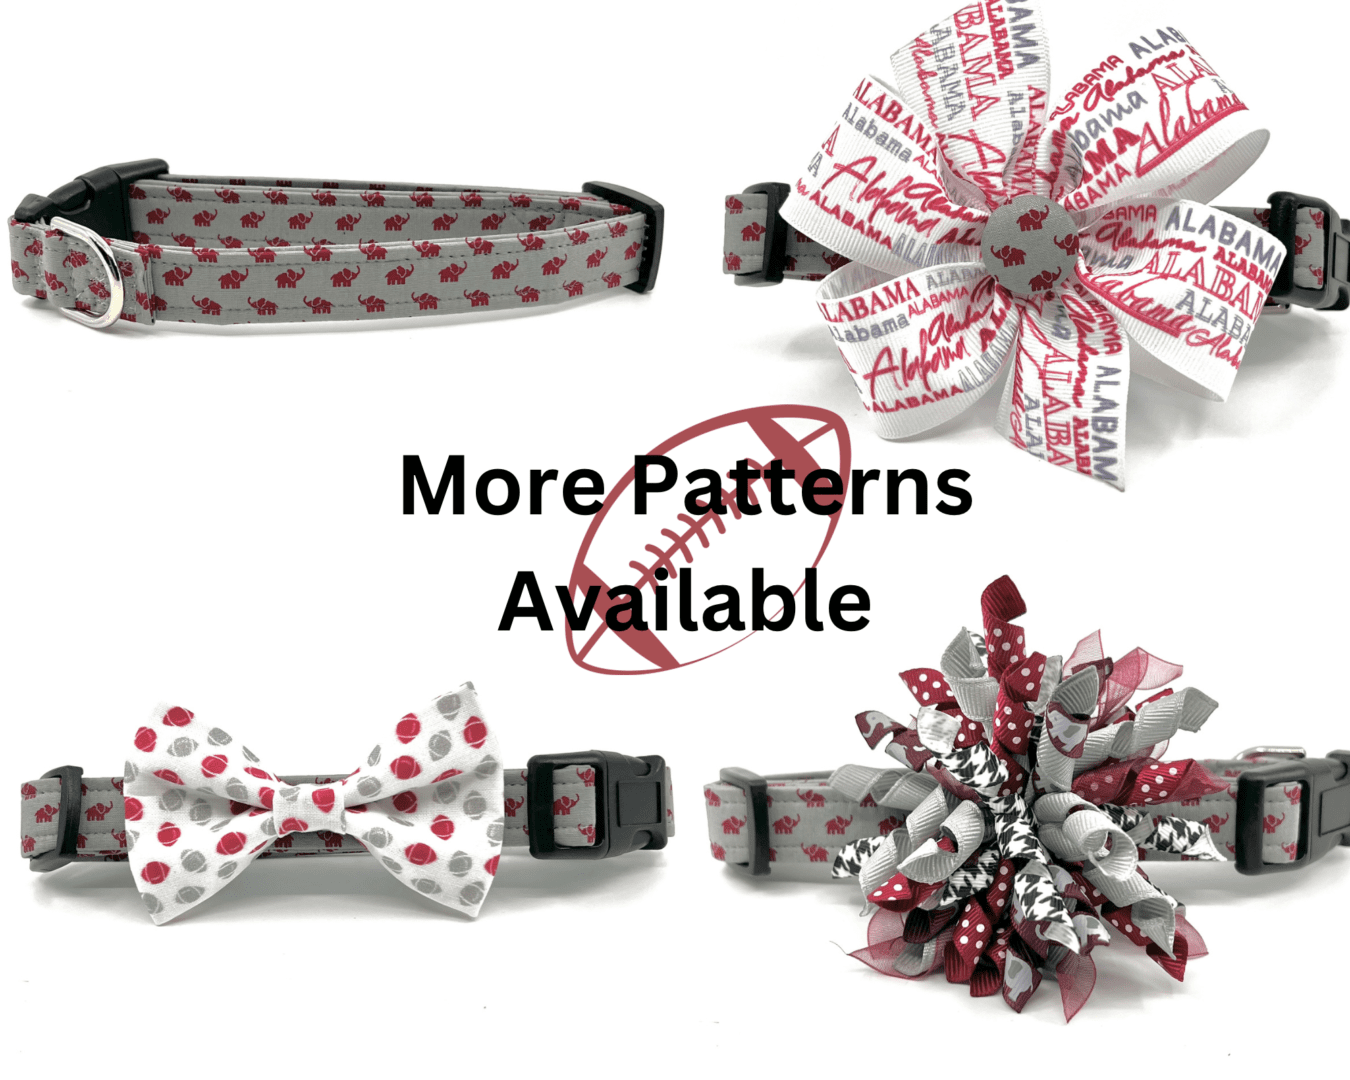 A variety of patterns are available for dog collars.